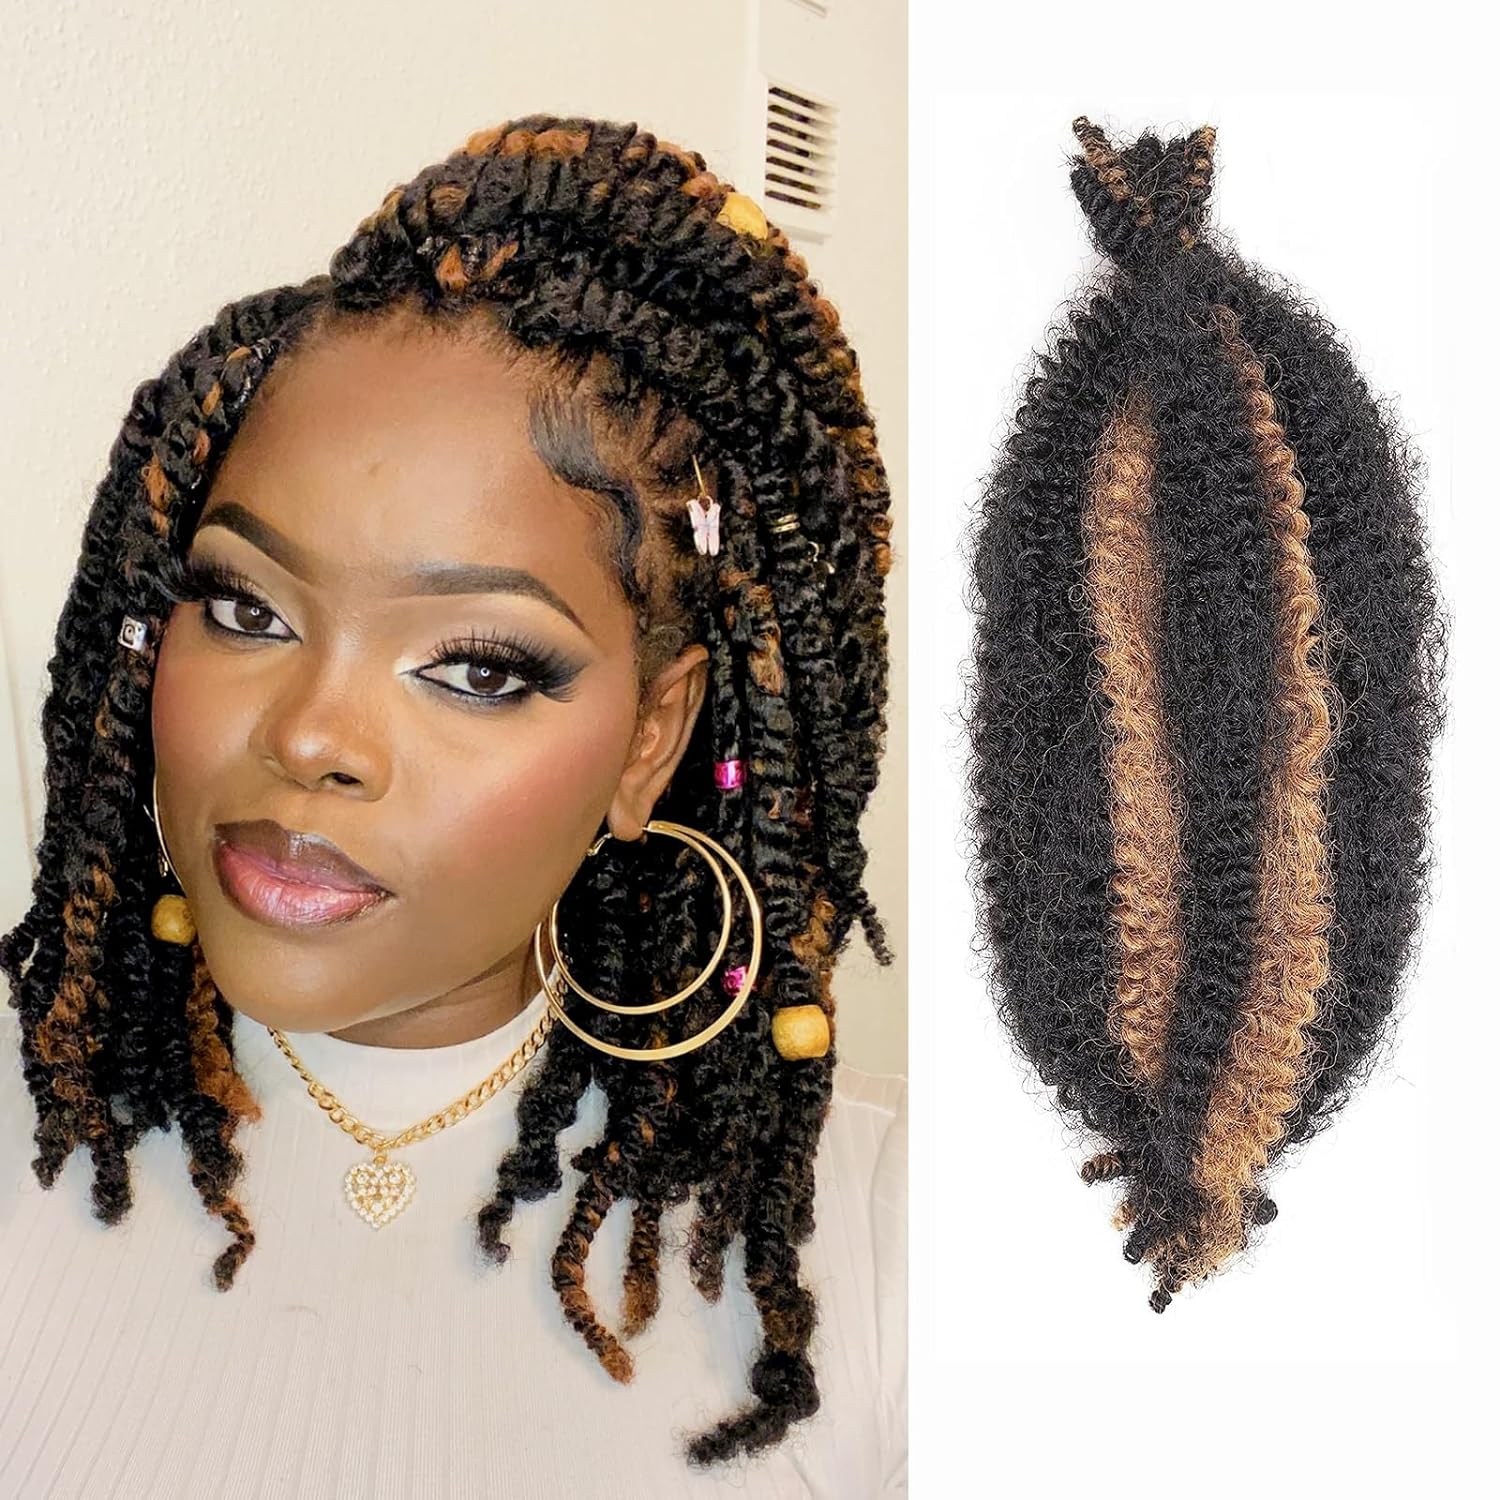 FAST SHIPPING 3-5 DAY SA | ToyoTress Springy Afro Twist Hair - Short Black Marley Hair For Faux Locs, Afro Kinky Curly Marley Twist Braiding Hair Extensions Synthetic